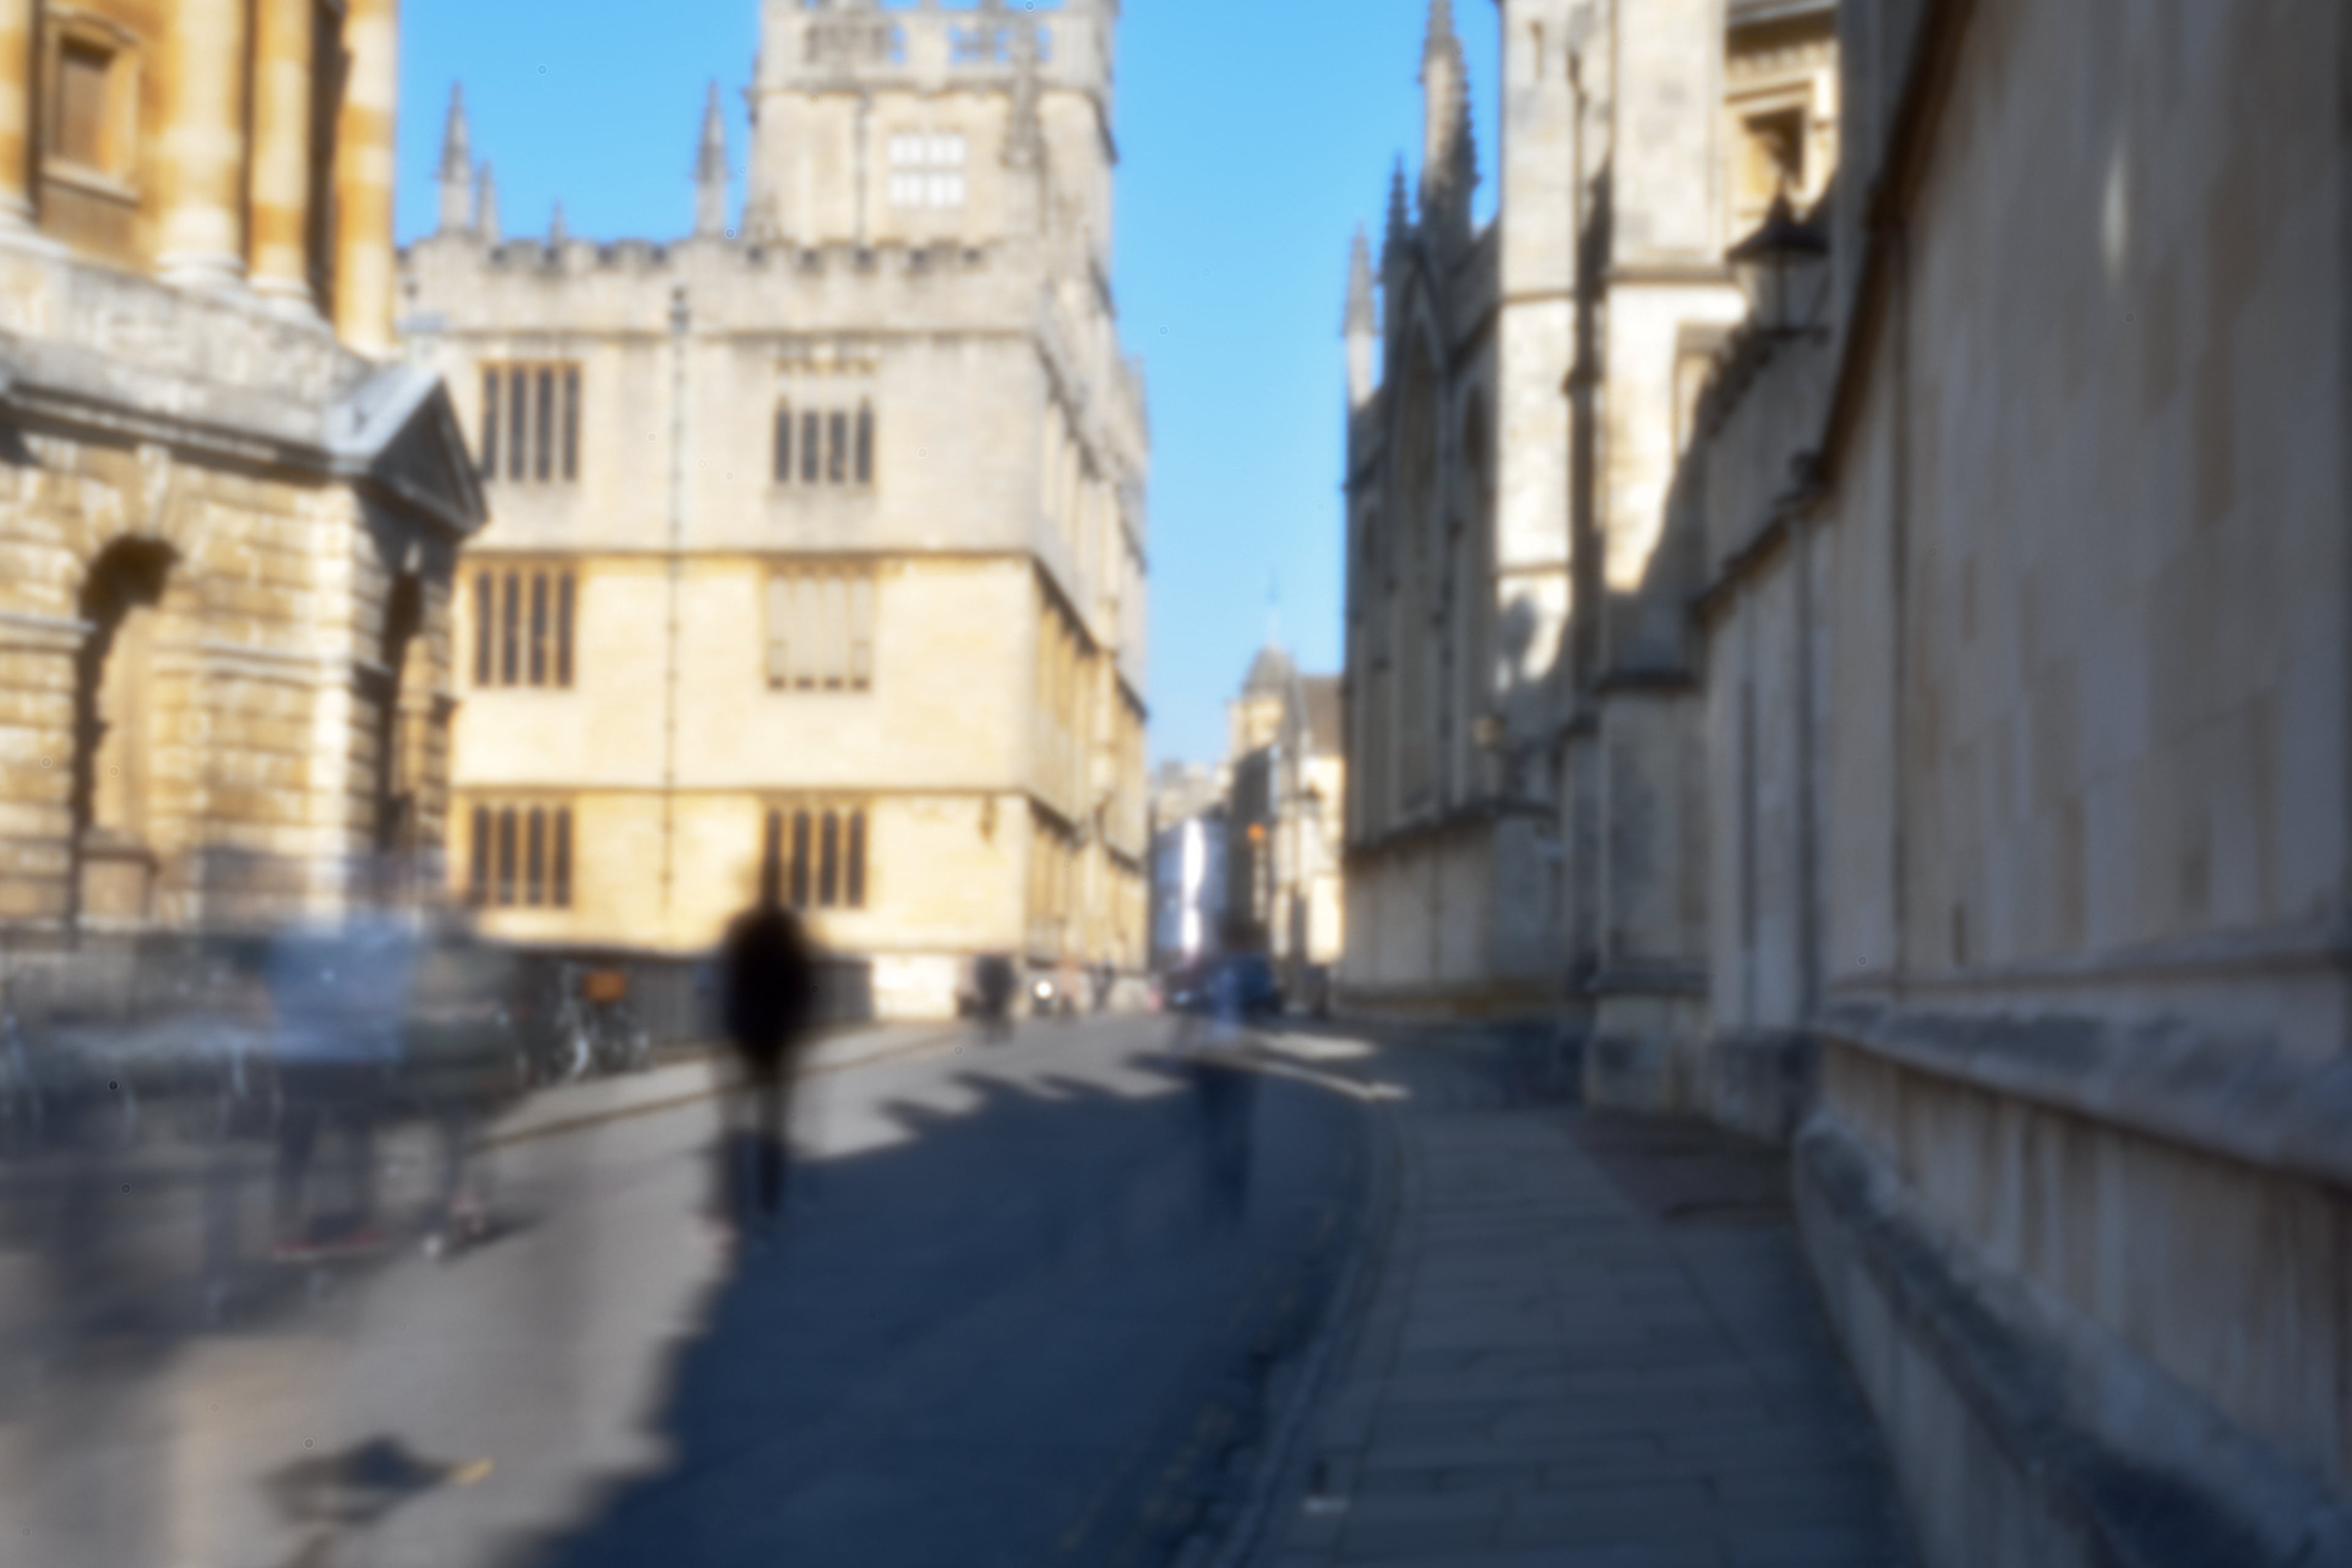 Tourists in Radcliffe Square. Even in bright sunlight (Oxford is seeing
unusually nice weather for February) I had to expose the image for 4 seconds at
ISO 100. Any motion thus appears blurred, so a tripod was a
necessity.